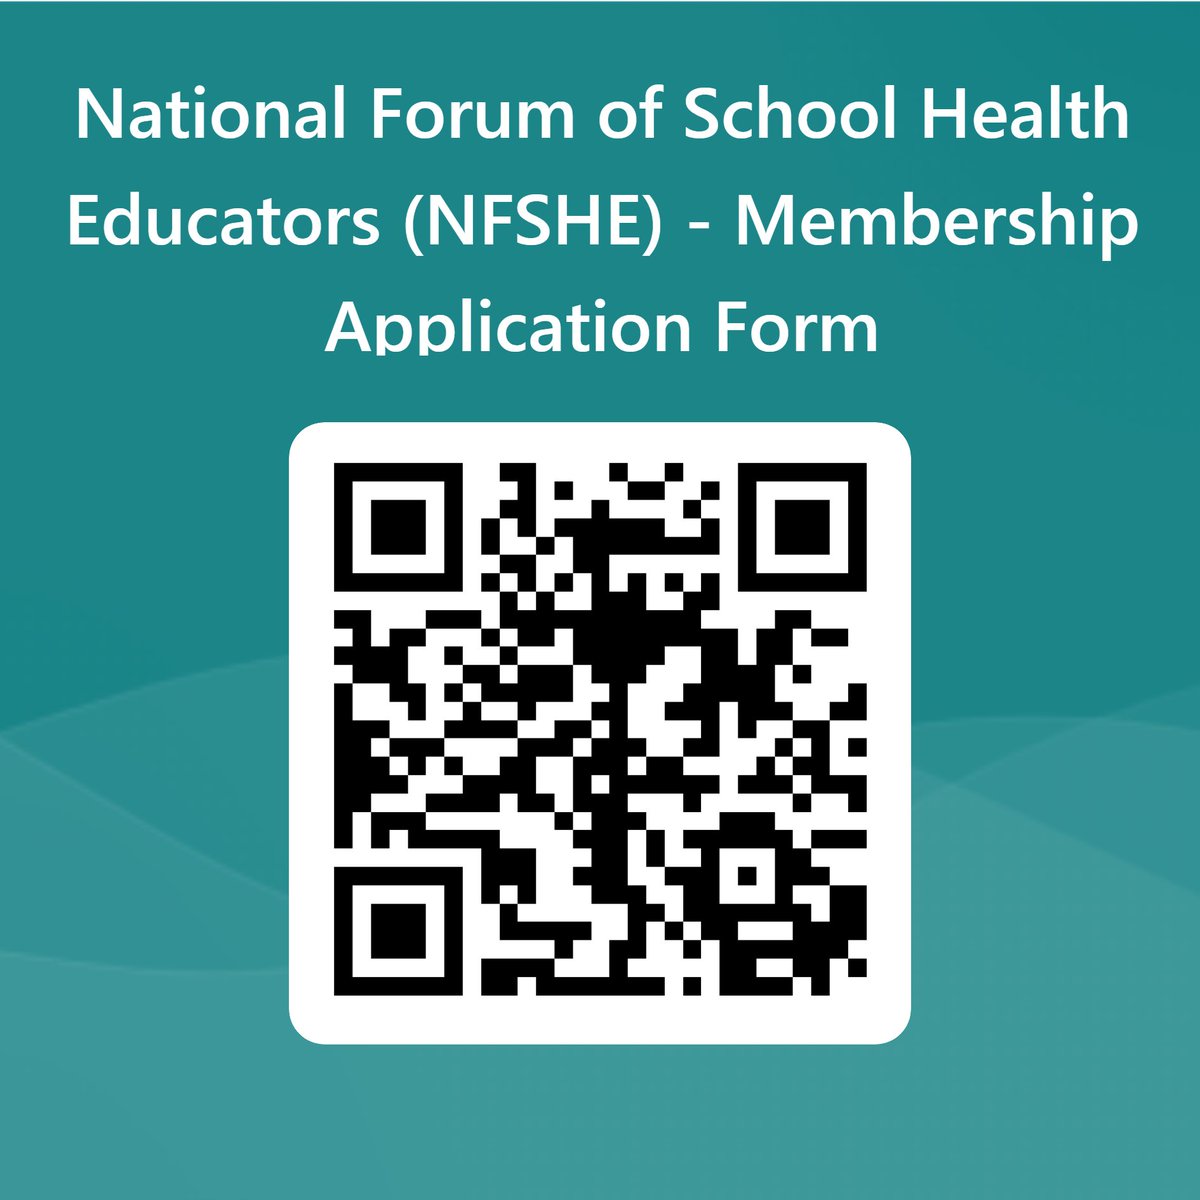 📢 Calling all UK #SCPHN #SchoolNurse academics    

📚Join the National Forum for School Health Educators #NFSHE & be a part of a vibrant community dedicated to advancing School Nurse Education 

🌟Click the link or use the QR code to sign up - its free! 
forms.office.com/e/yEwNgb76KY